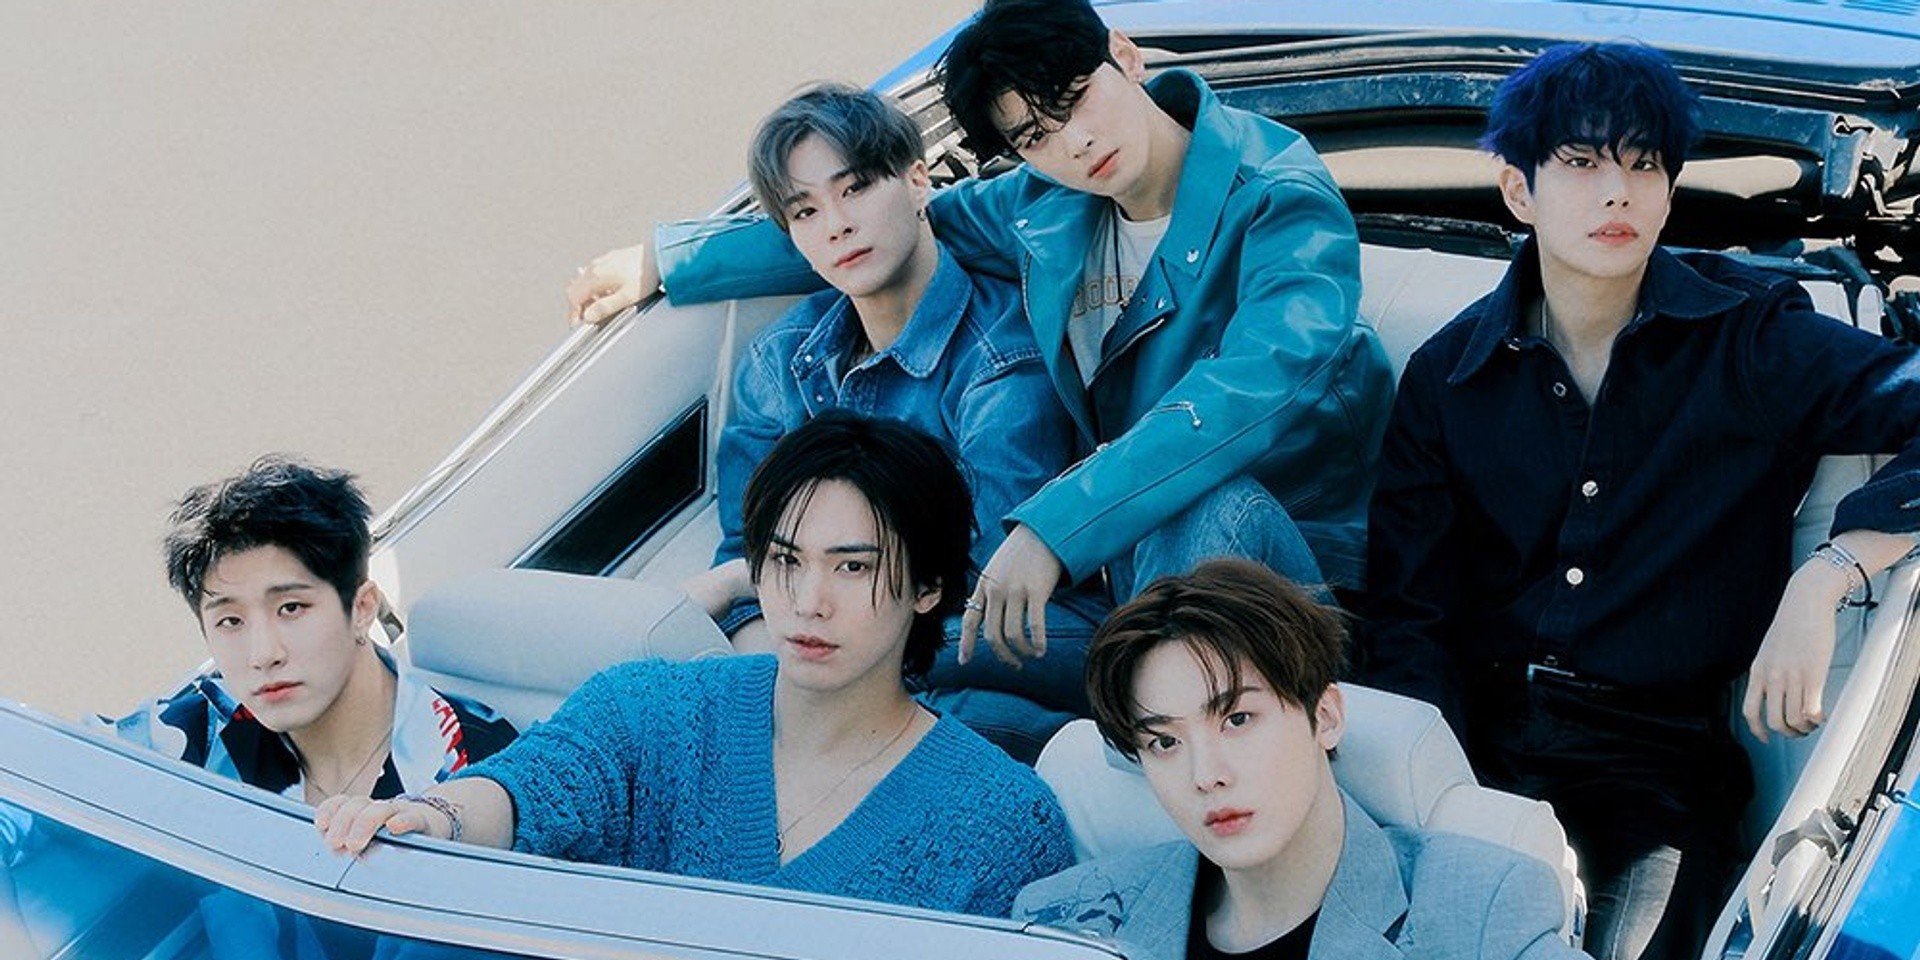 ASTRO set off on a 'Drive to the Starry Road' in new full album — listen